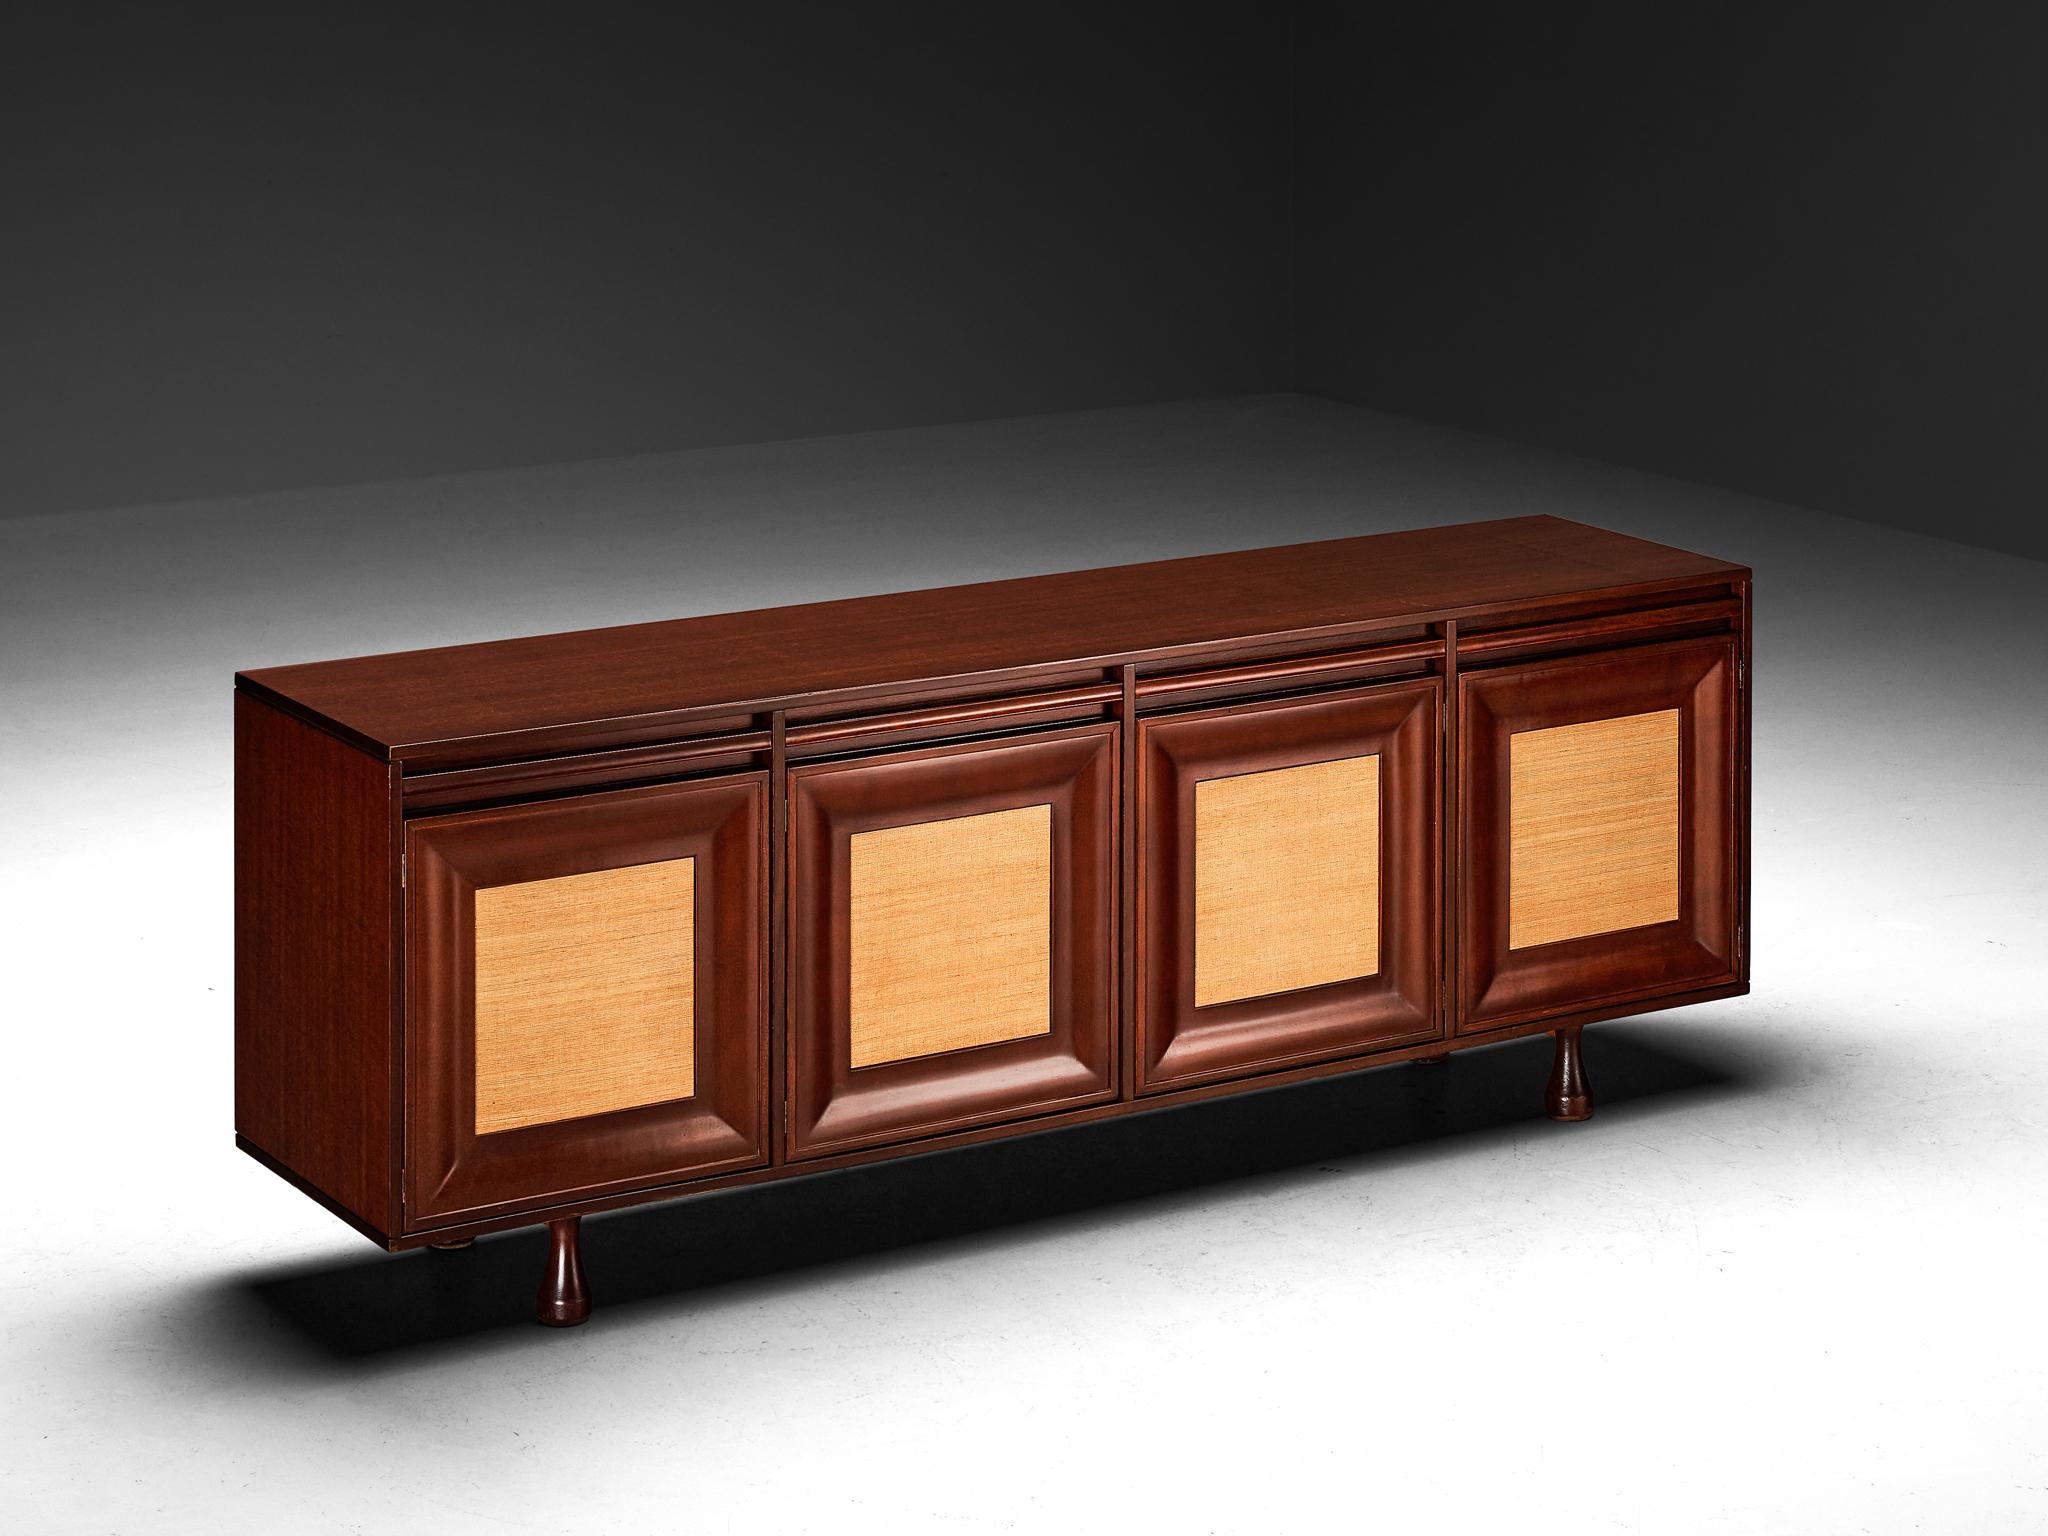 Angelo Mangiarotti for Sorgente dei Mobili, sideboard, mahogany, grasscloth, Italy, 1960s

This outstanding cabinet, dating back to the 1960s, is a design by Angelo Mangiarotti produced for Sorgente dei Mobili. An rectangular layout comprised of